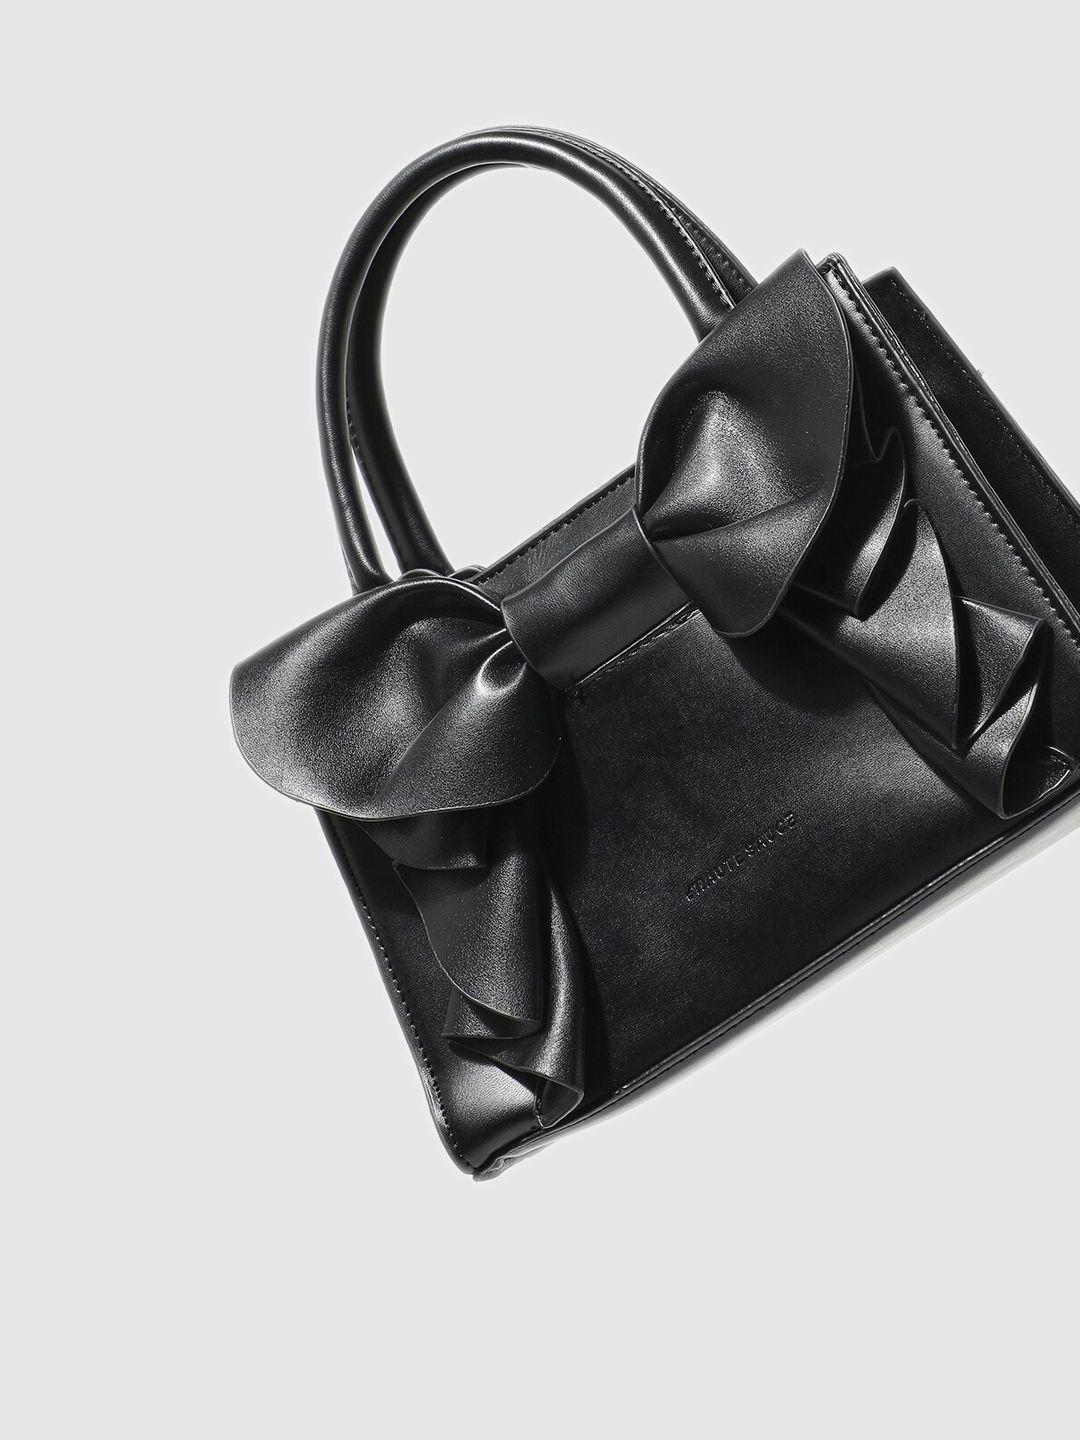 haute sauce by campus sutra black structured hobo bag with quilted